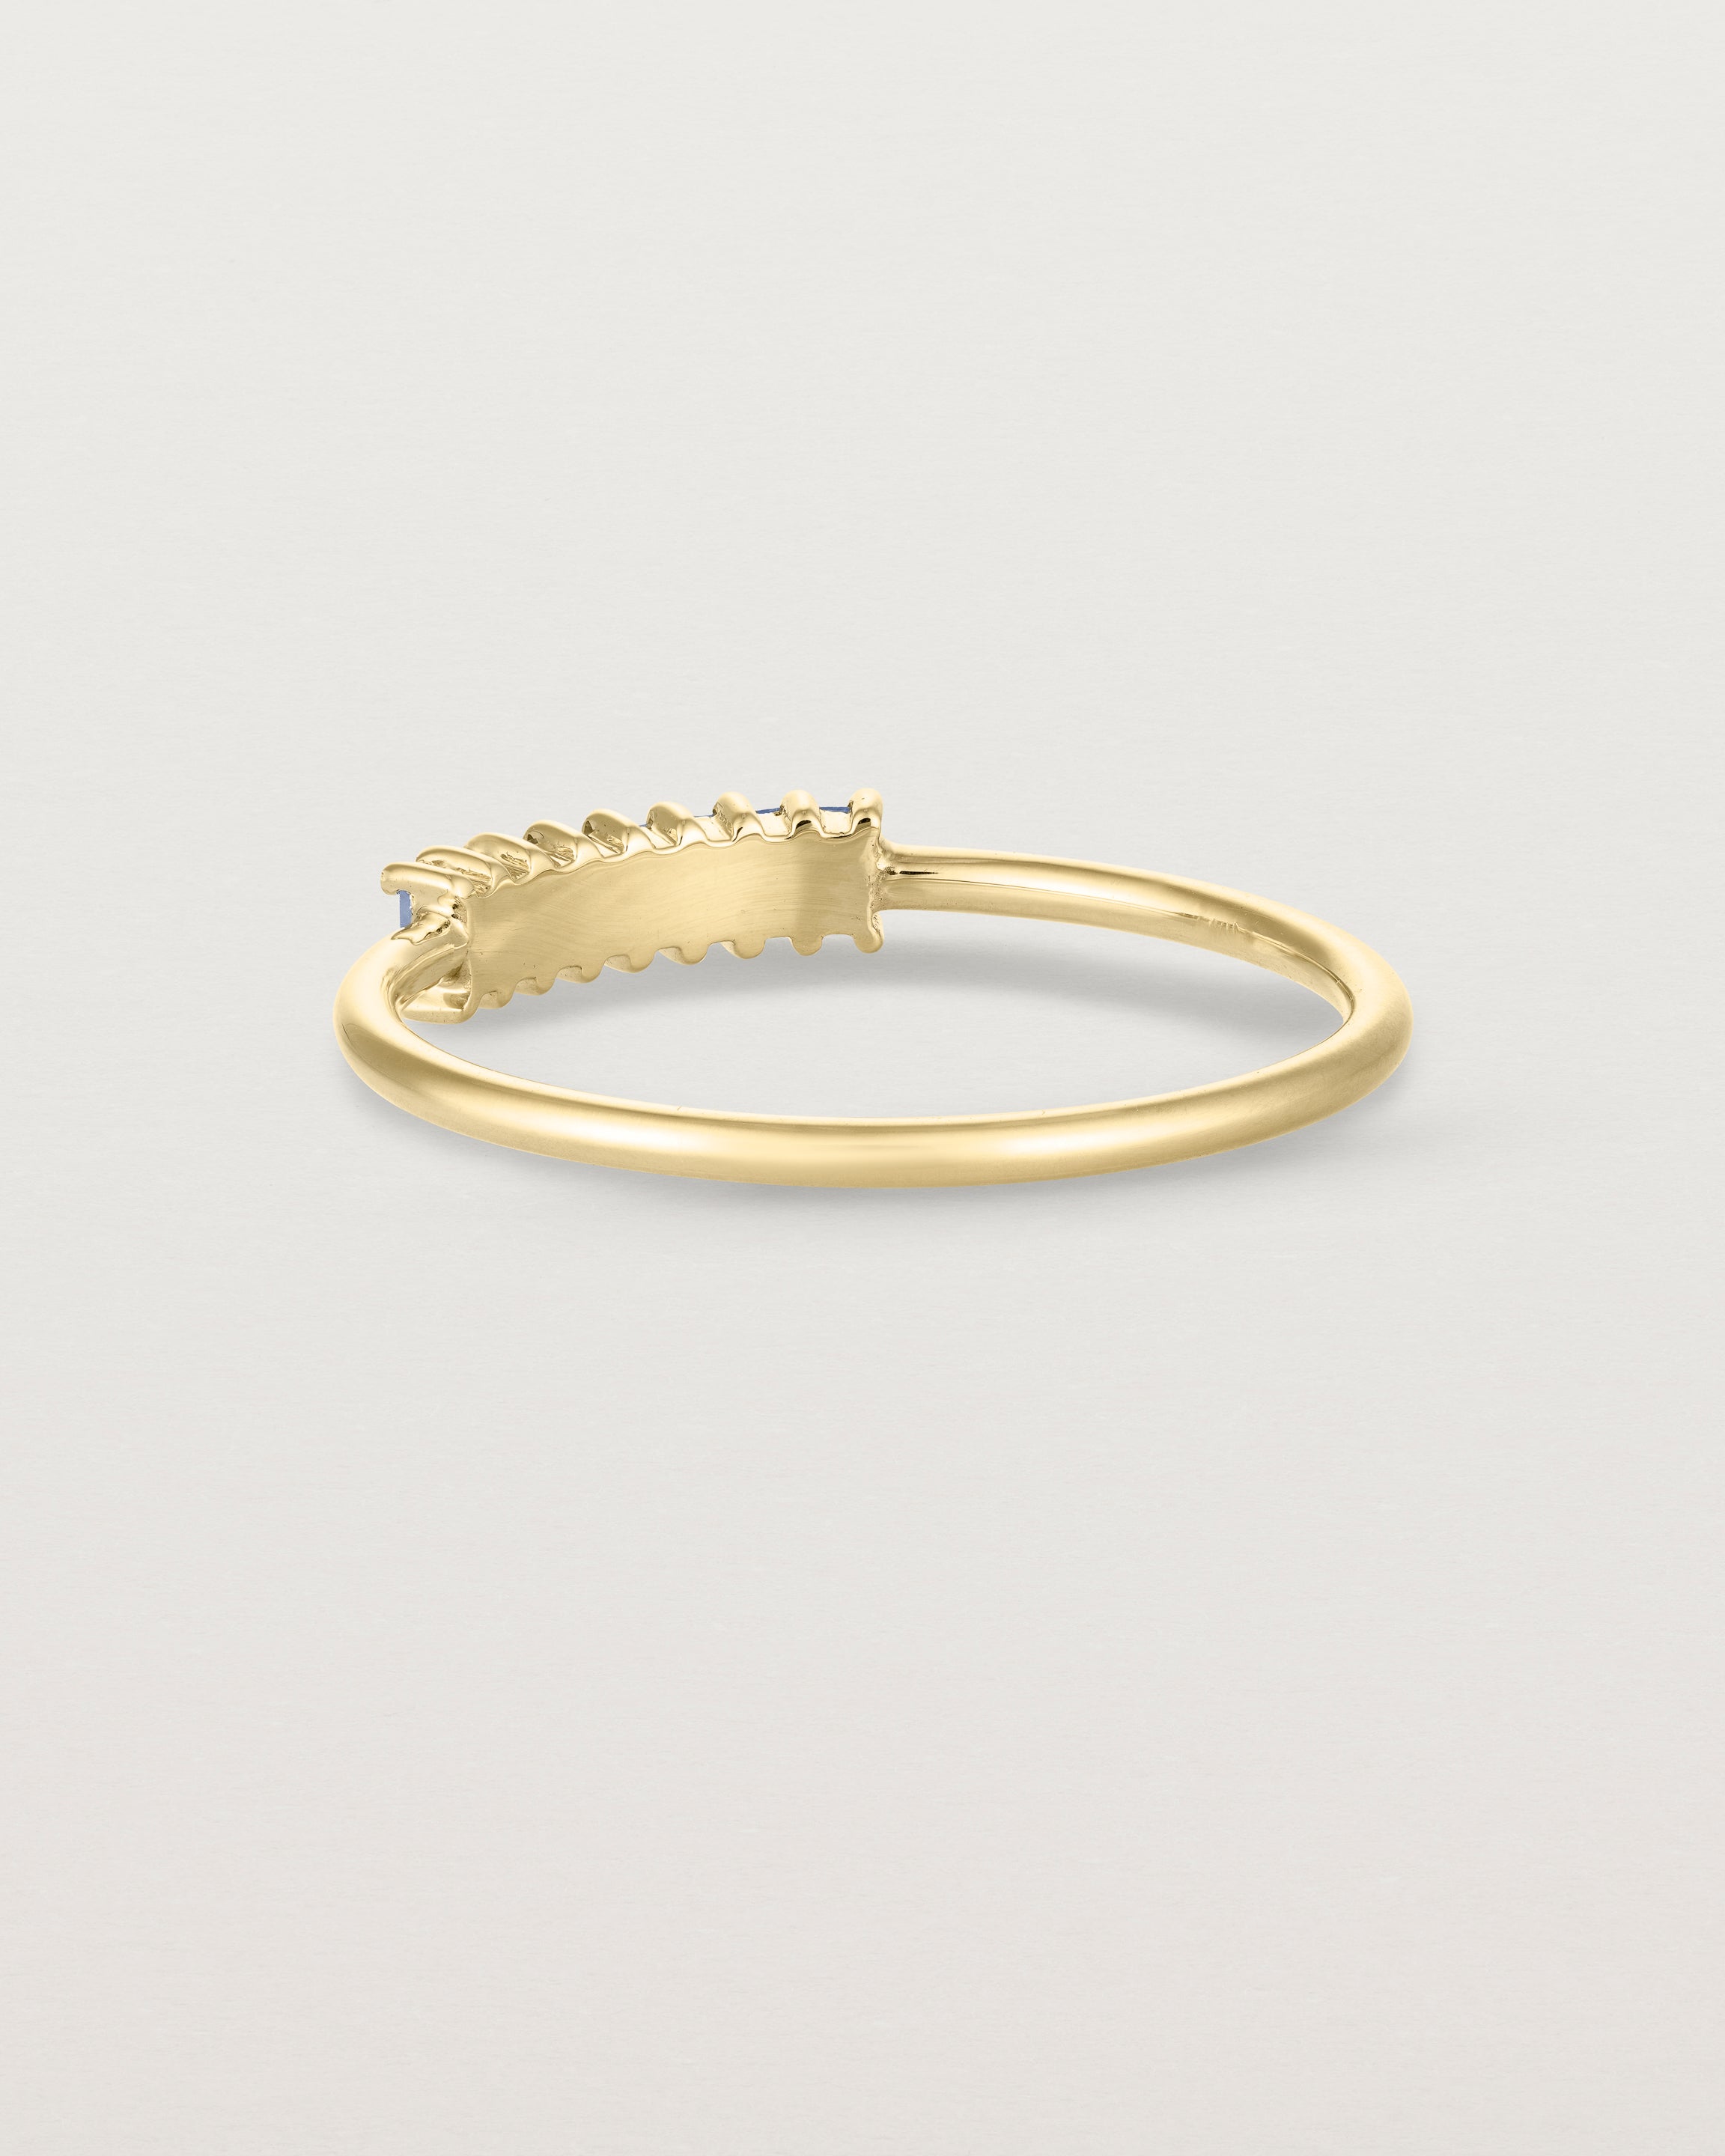 Back view of the Sena Wrap Ring | Sapphire in yellow gold.